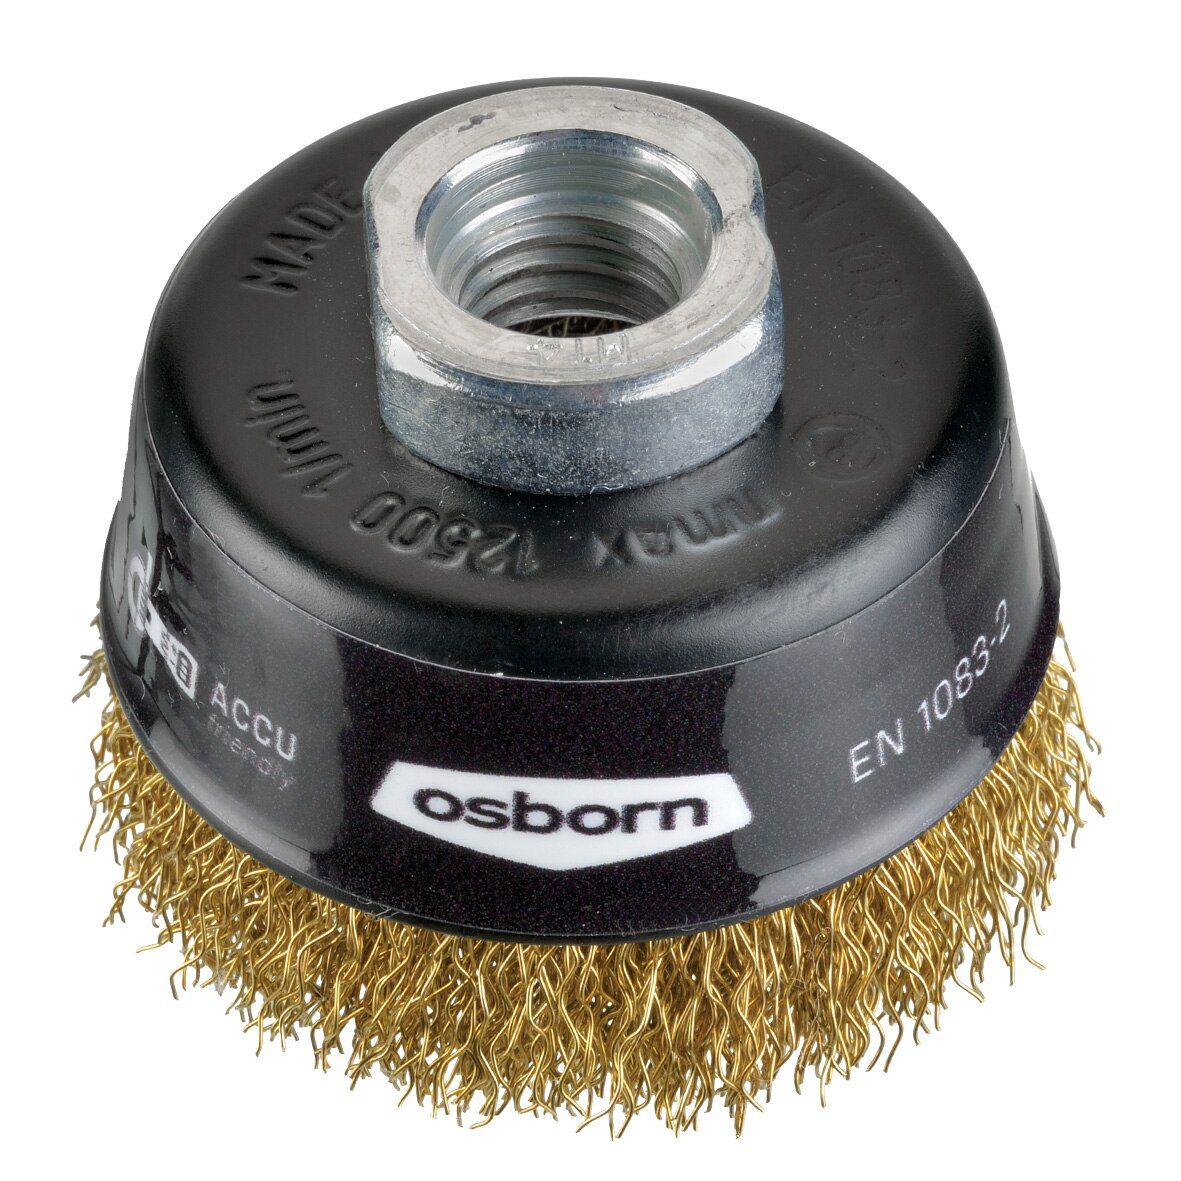 Cup Brushes, Crimped Xtreme Wire